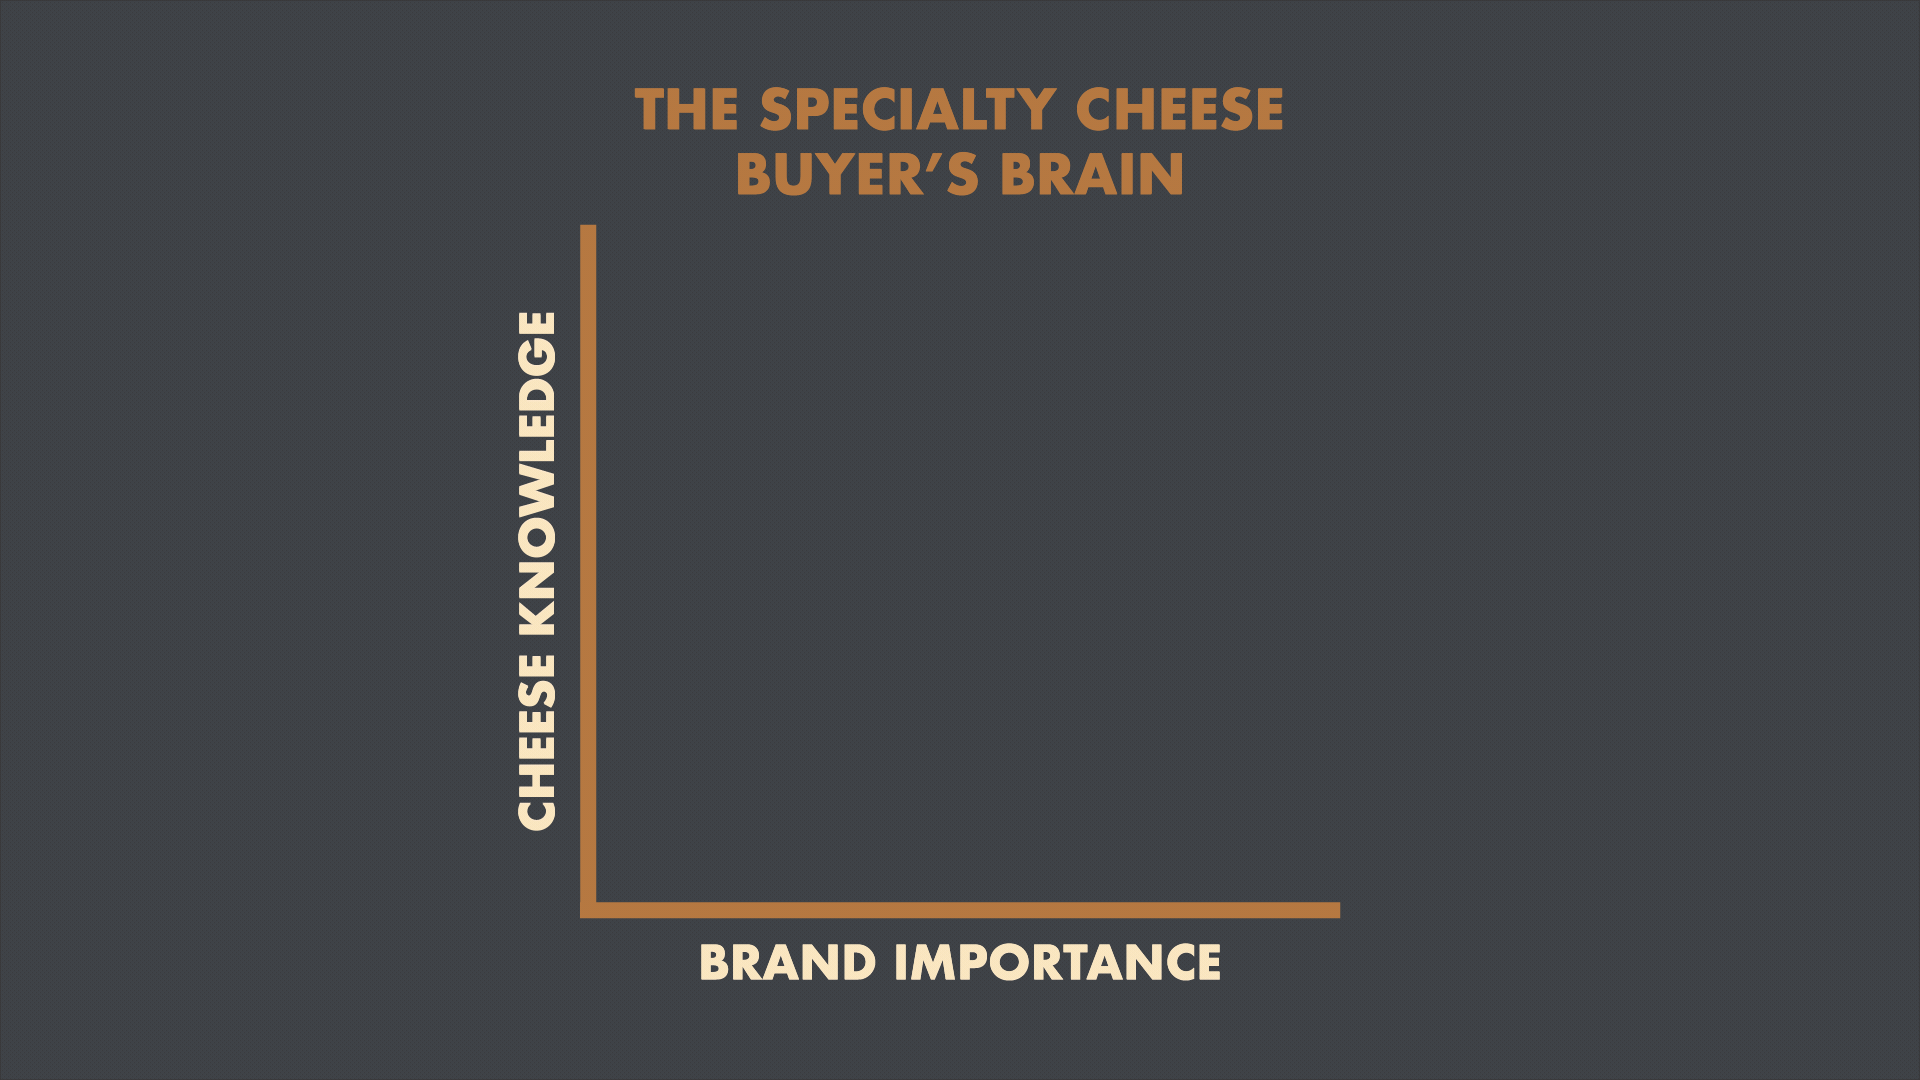 Graph showing that the more knowledge a person has about cheese, the less they care about brands.